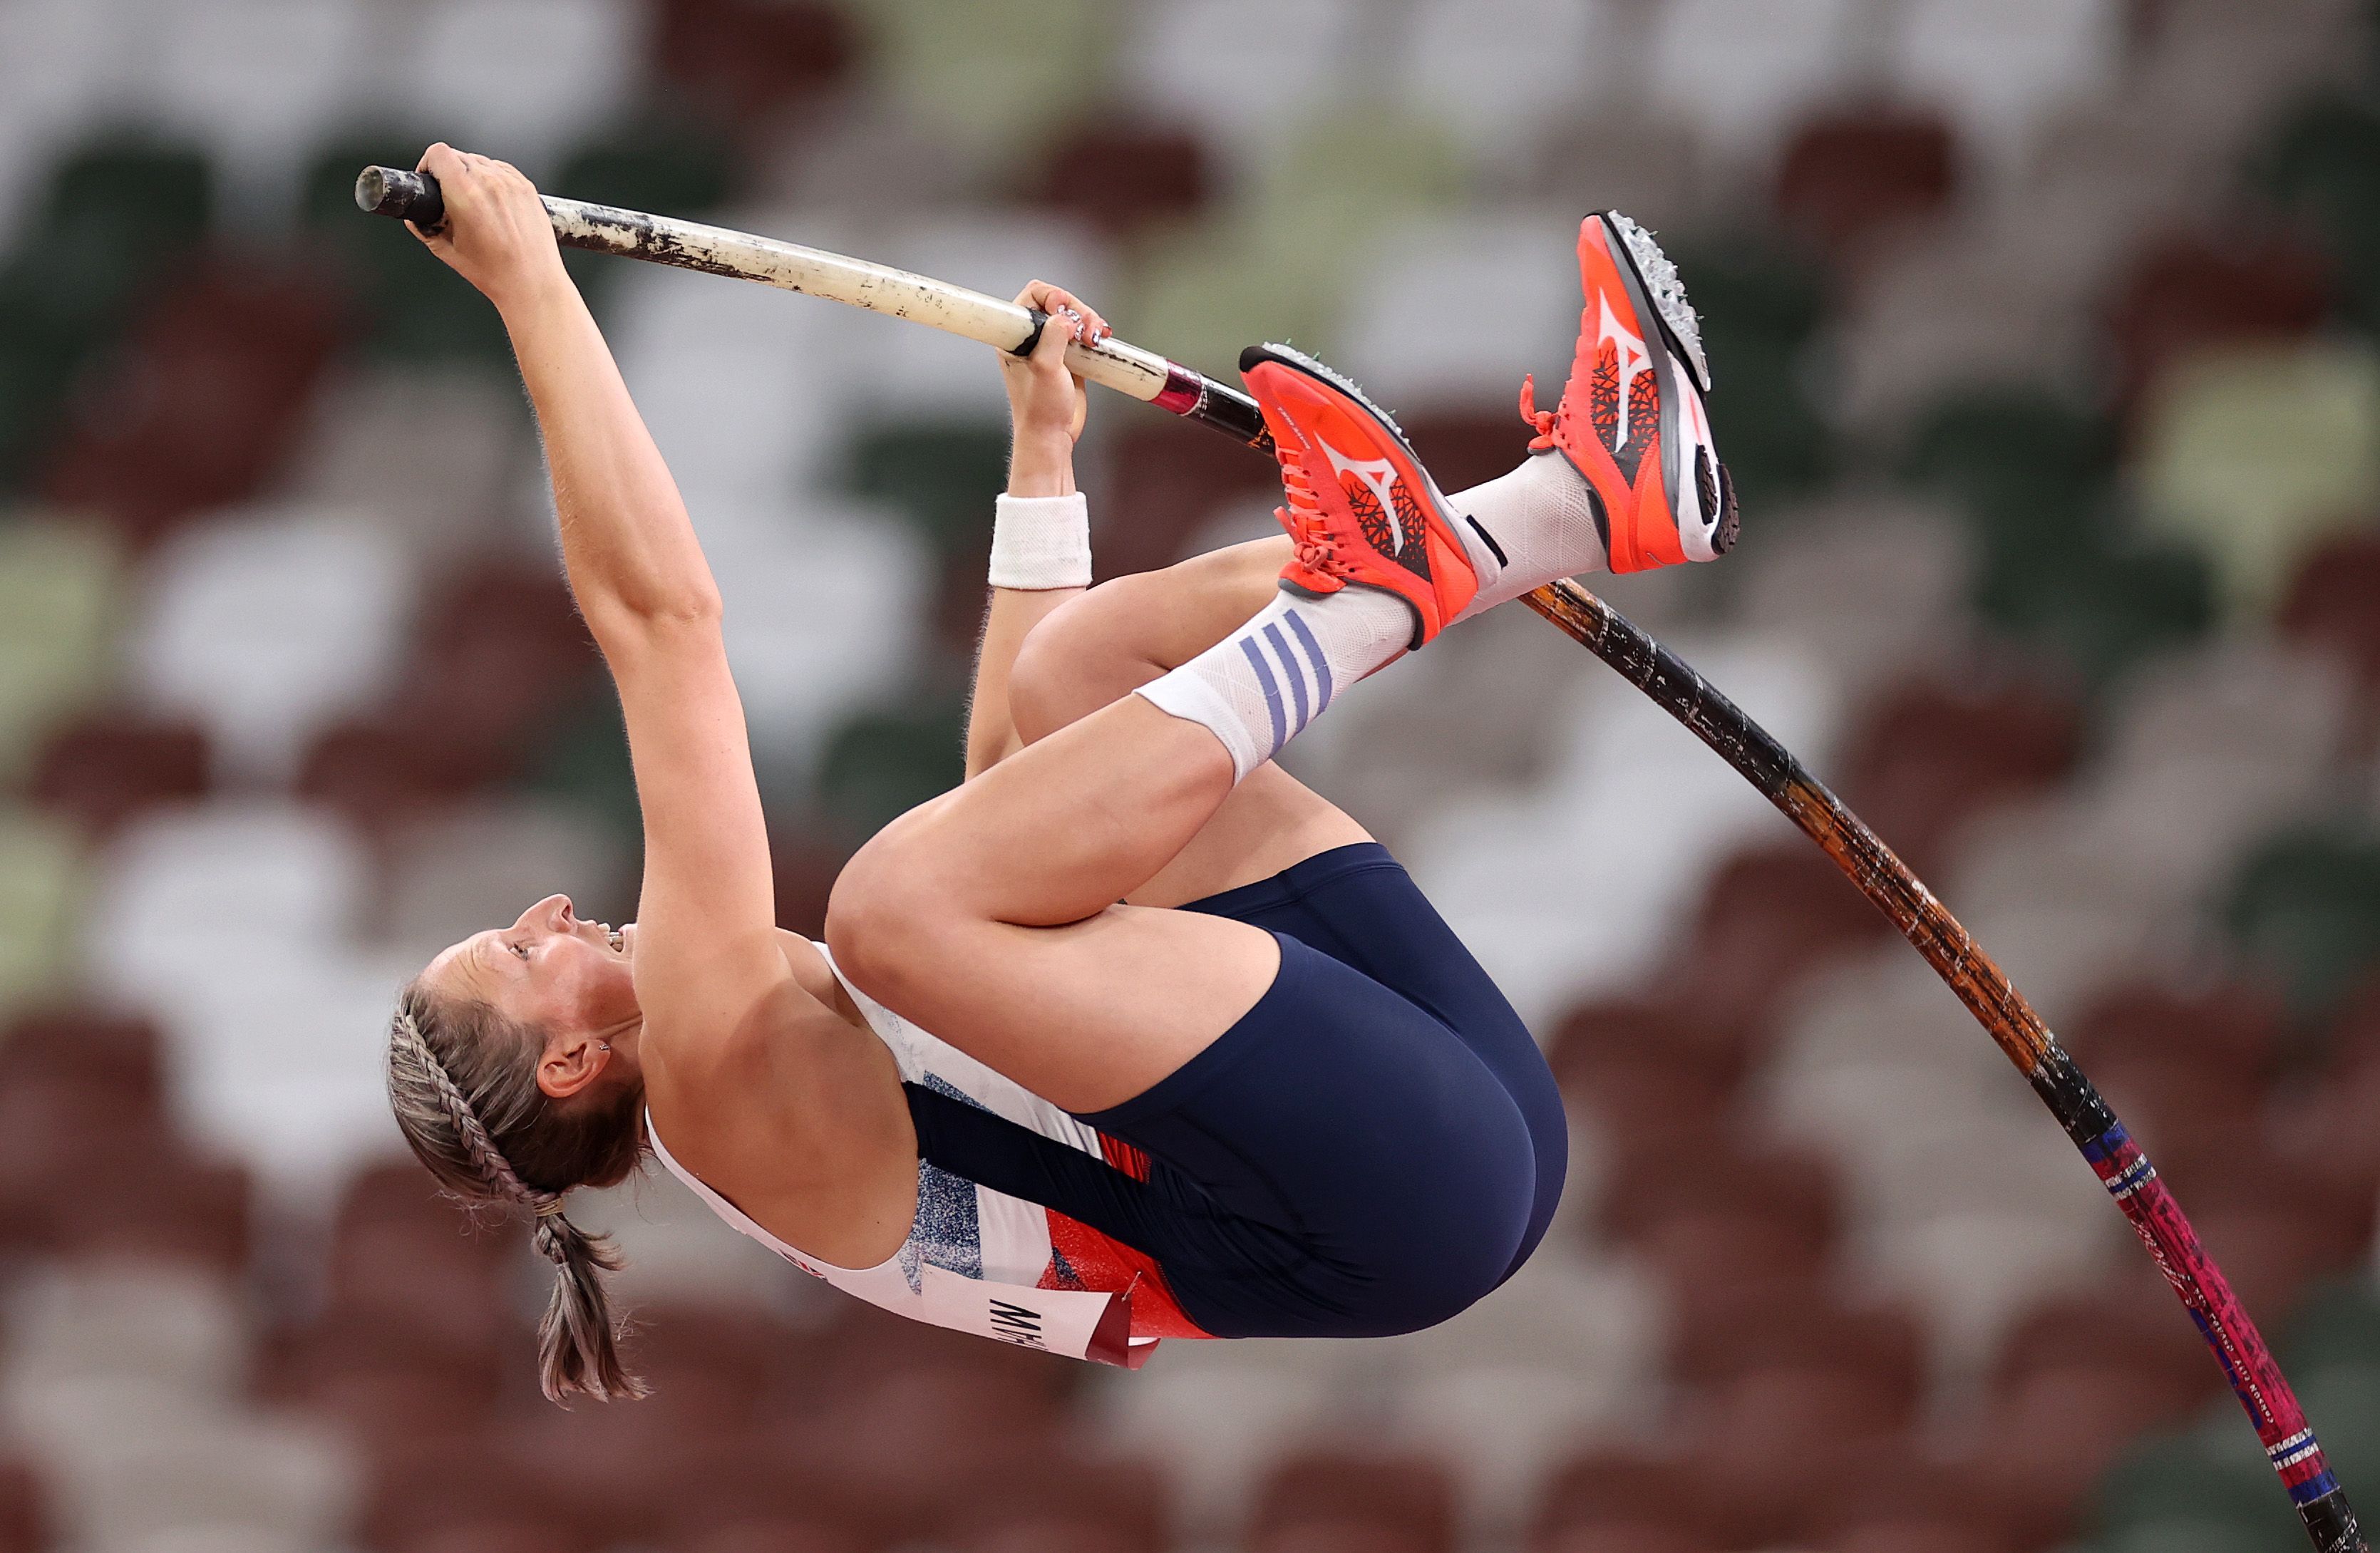 British javelin star Holly Bradshaw competing at the Olympic Games